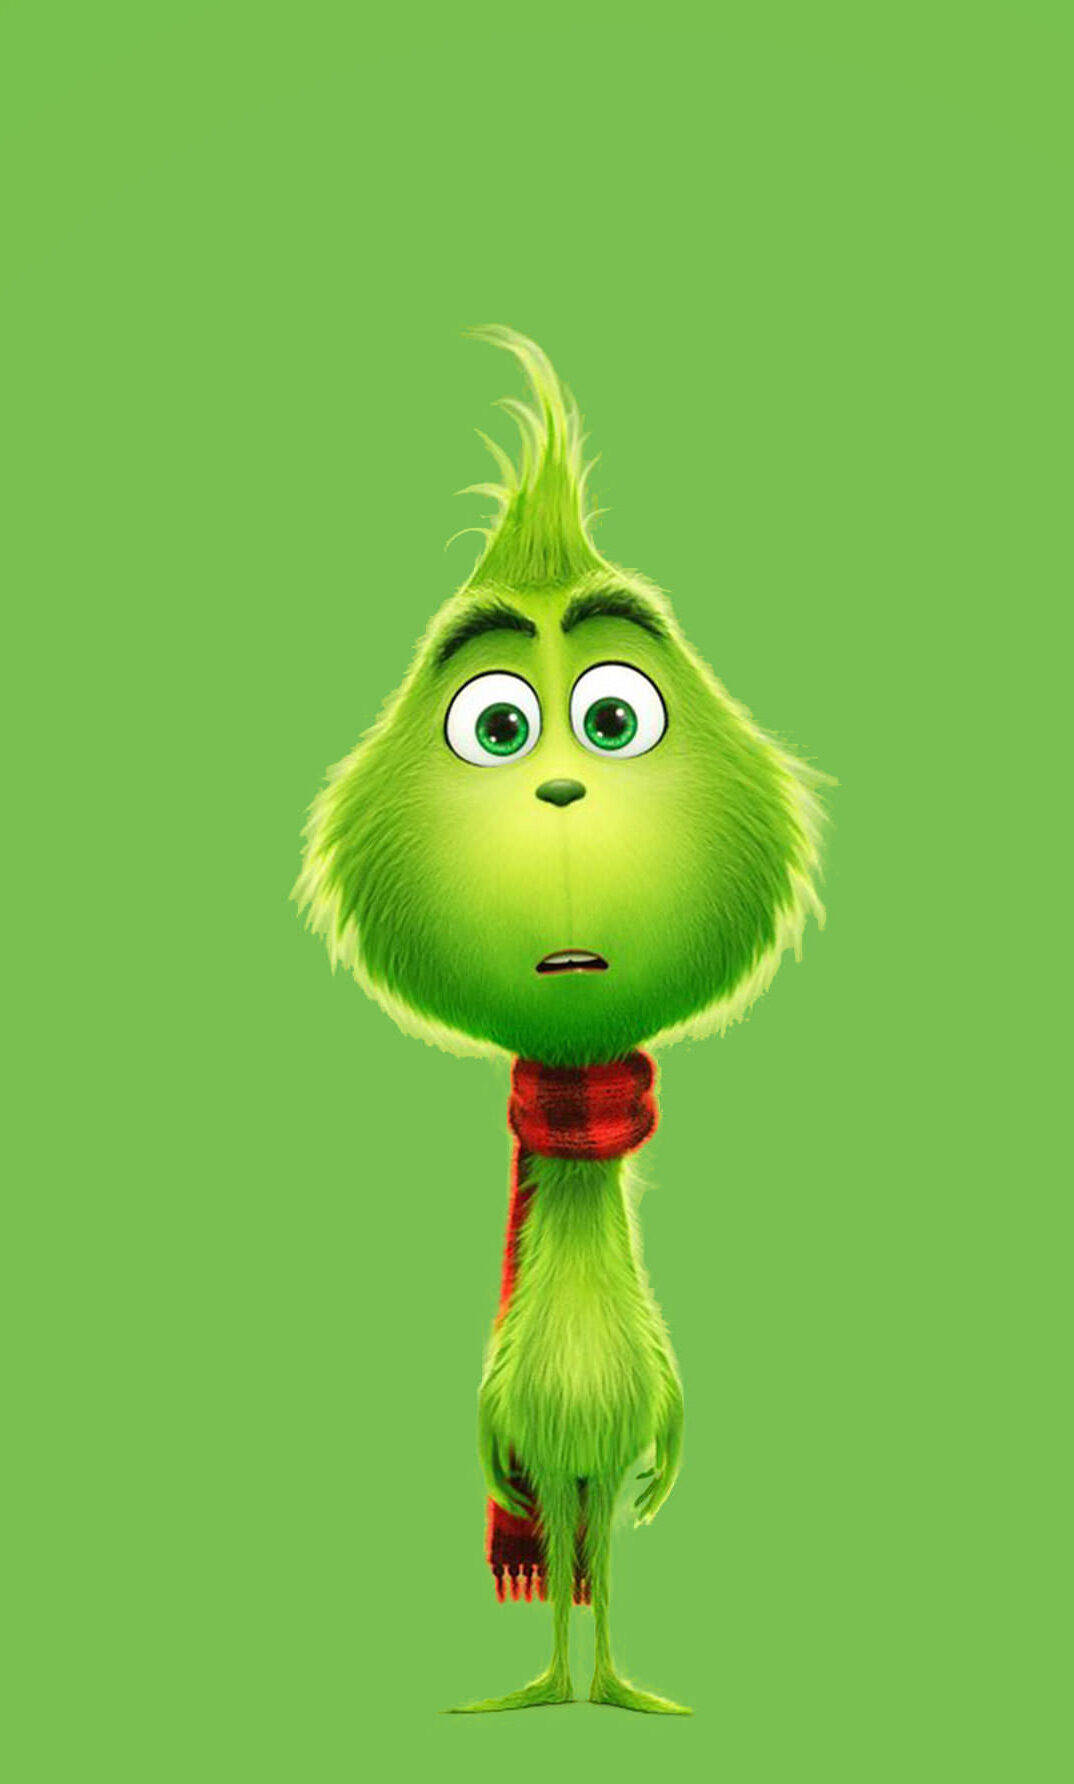 The Grinch Red Scarf Wallpaper